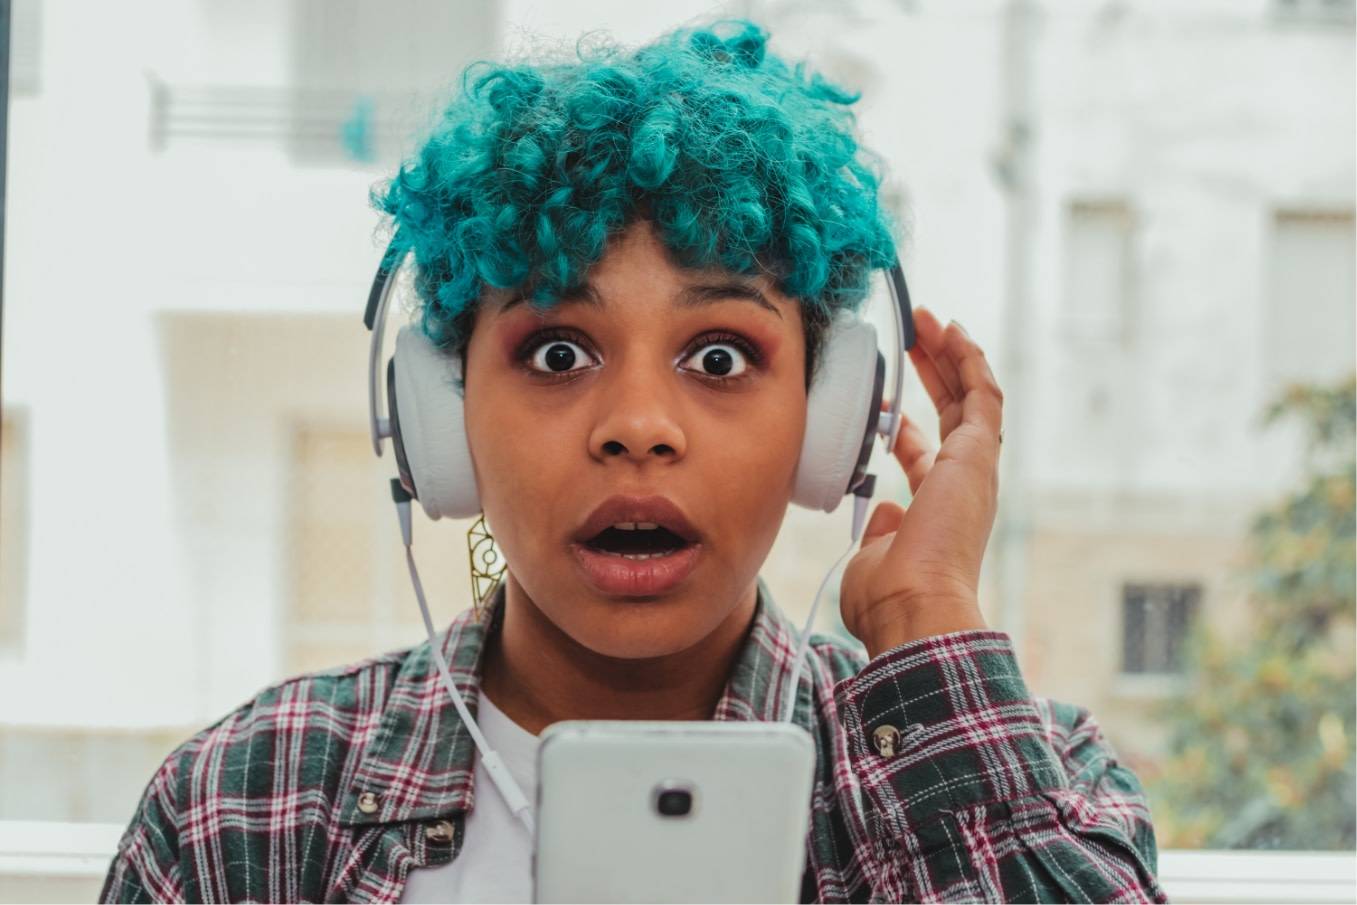 A young woman with teal hair has a fright while listening to audio content on her headphones